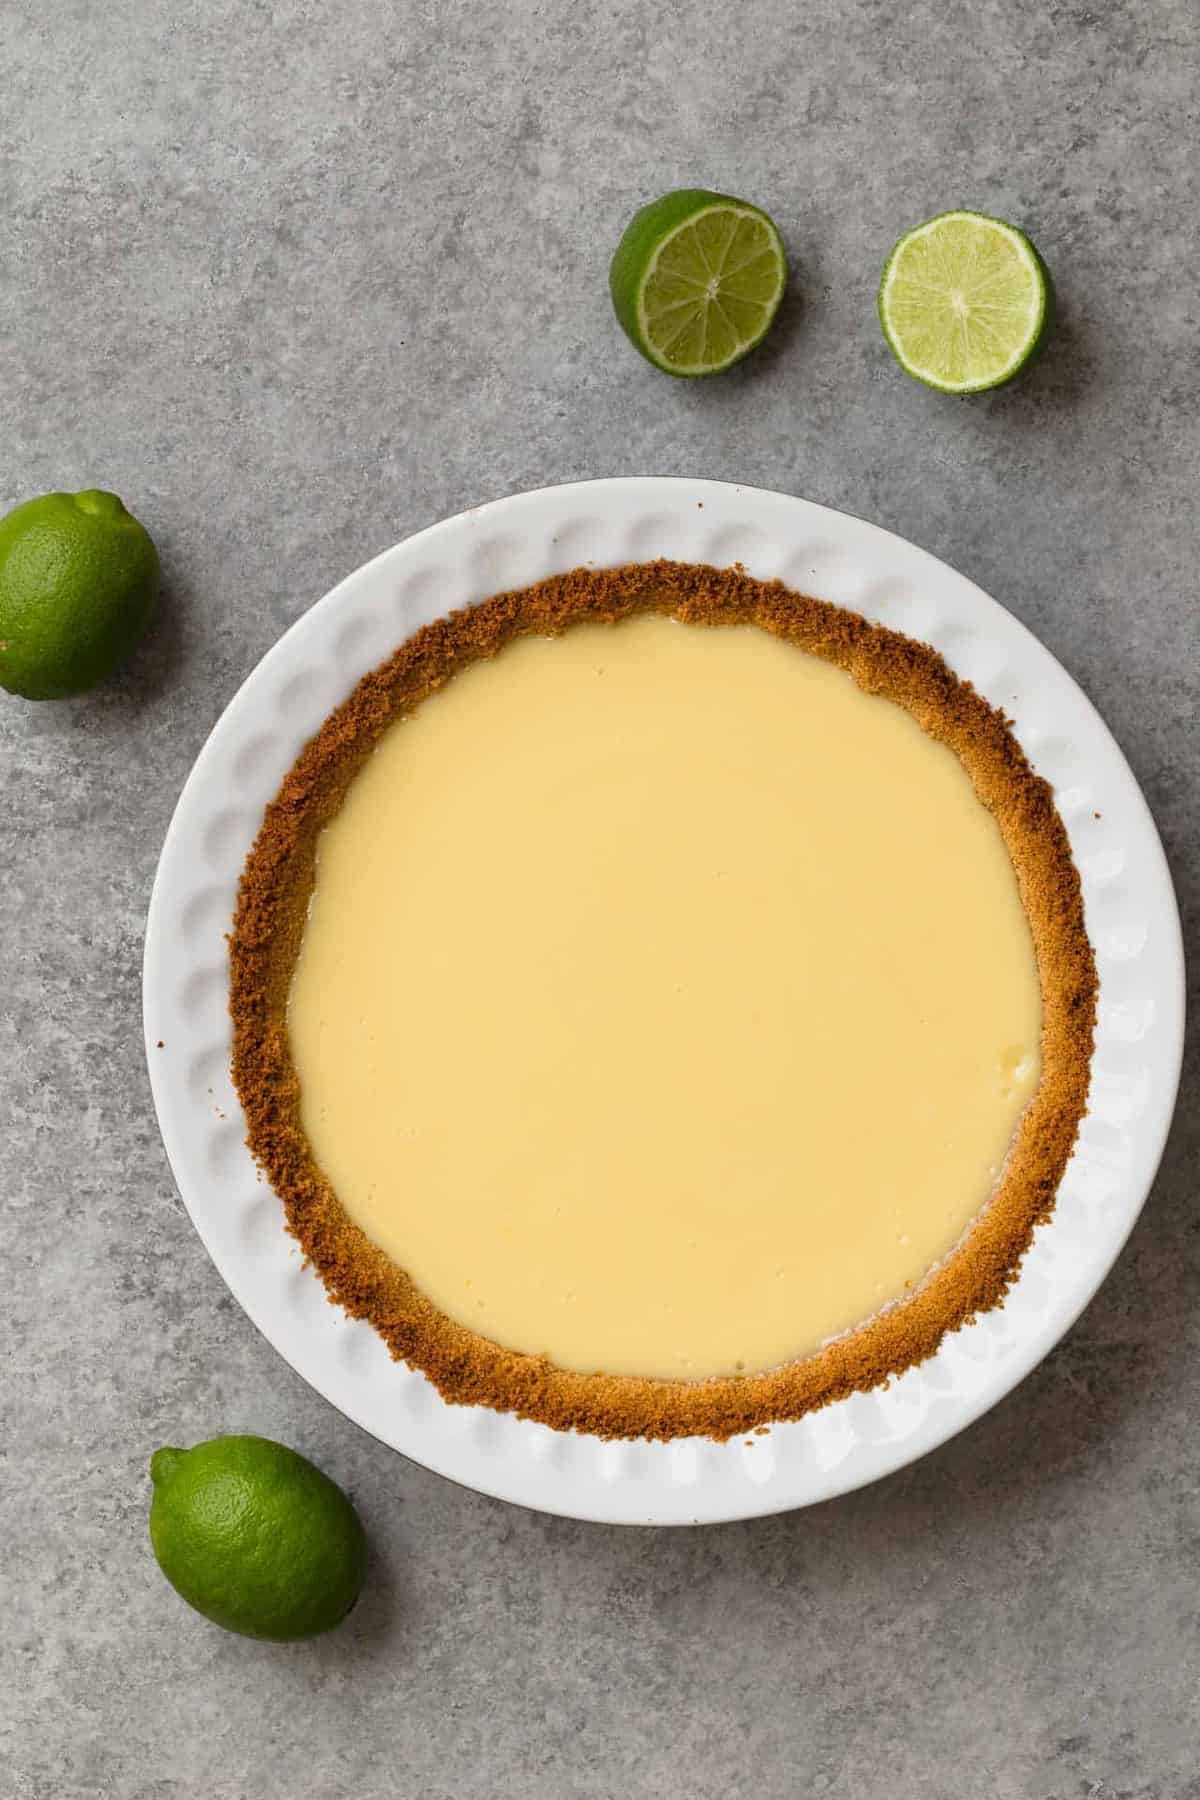 Lime pie with graham cracker crust baked in a white pie dish.